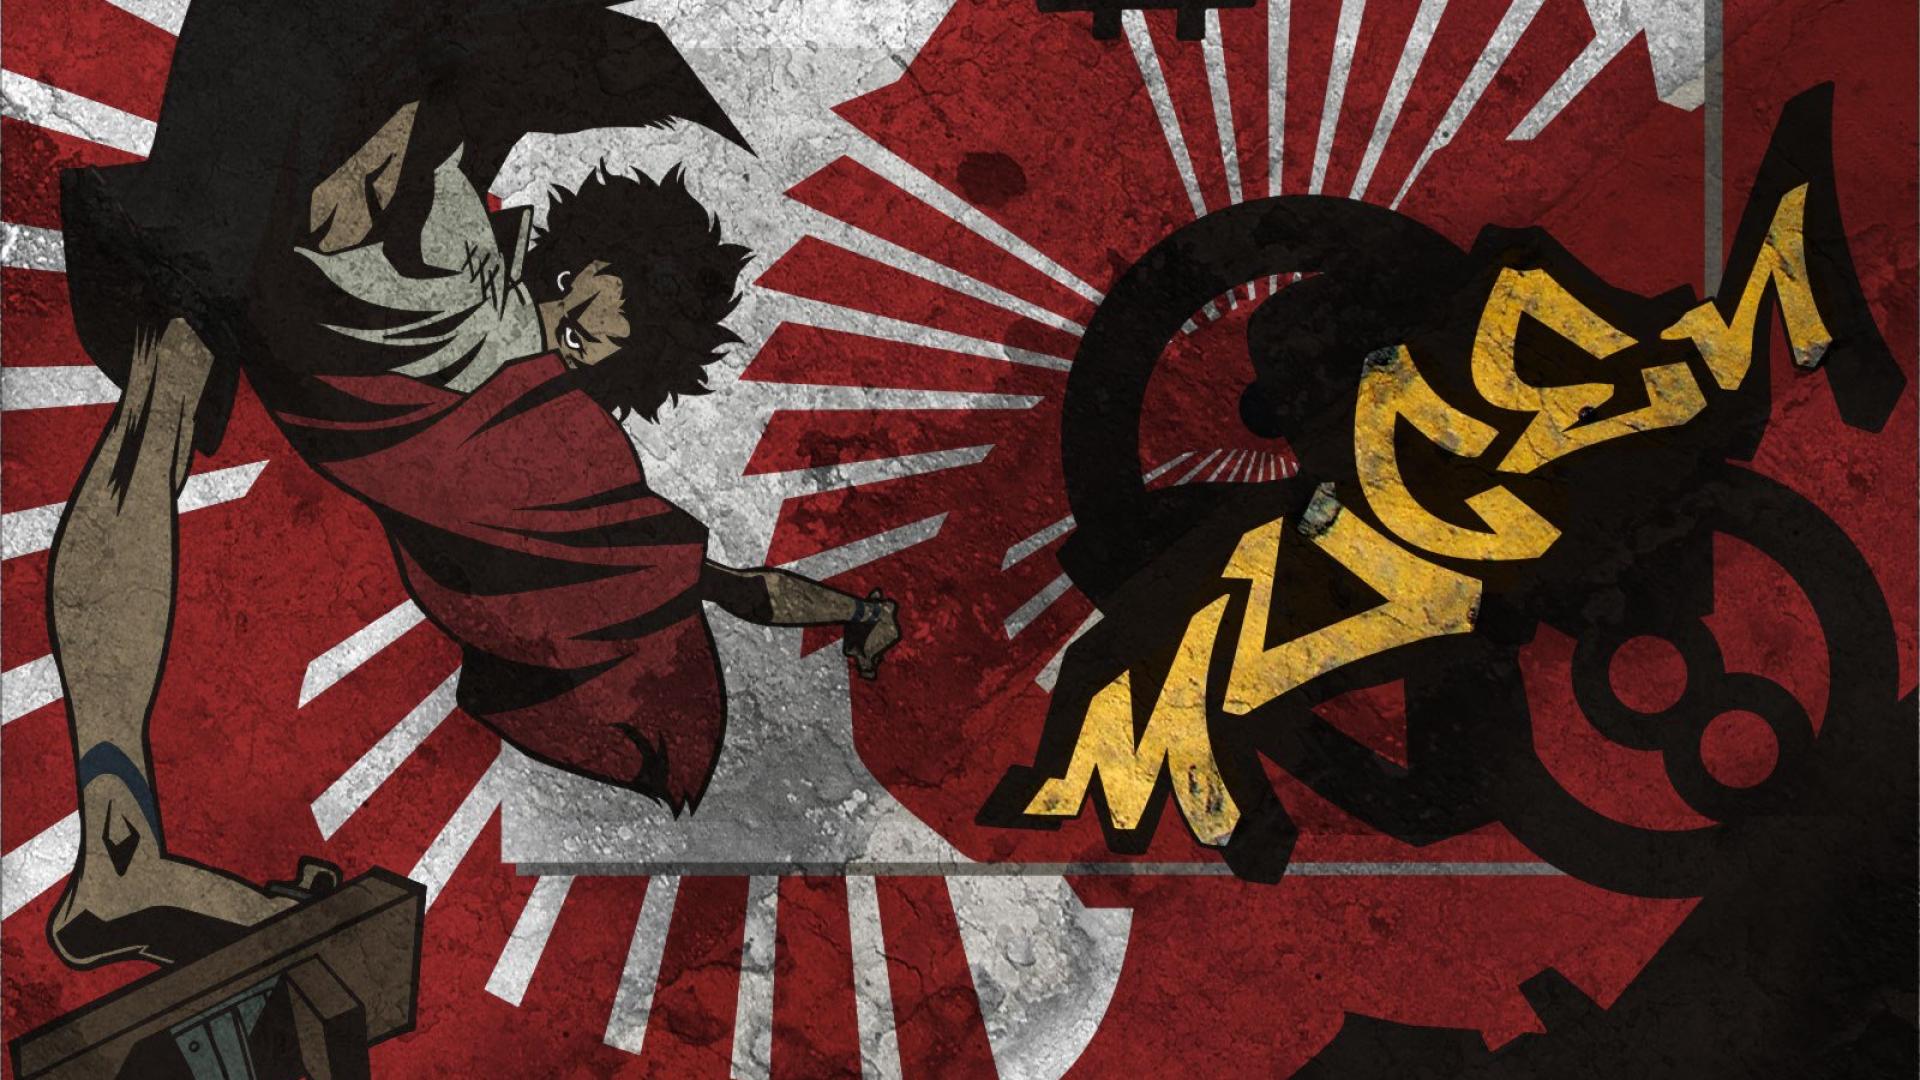 Samurai champloo wallpaper 1600x1200 - High Quality and other